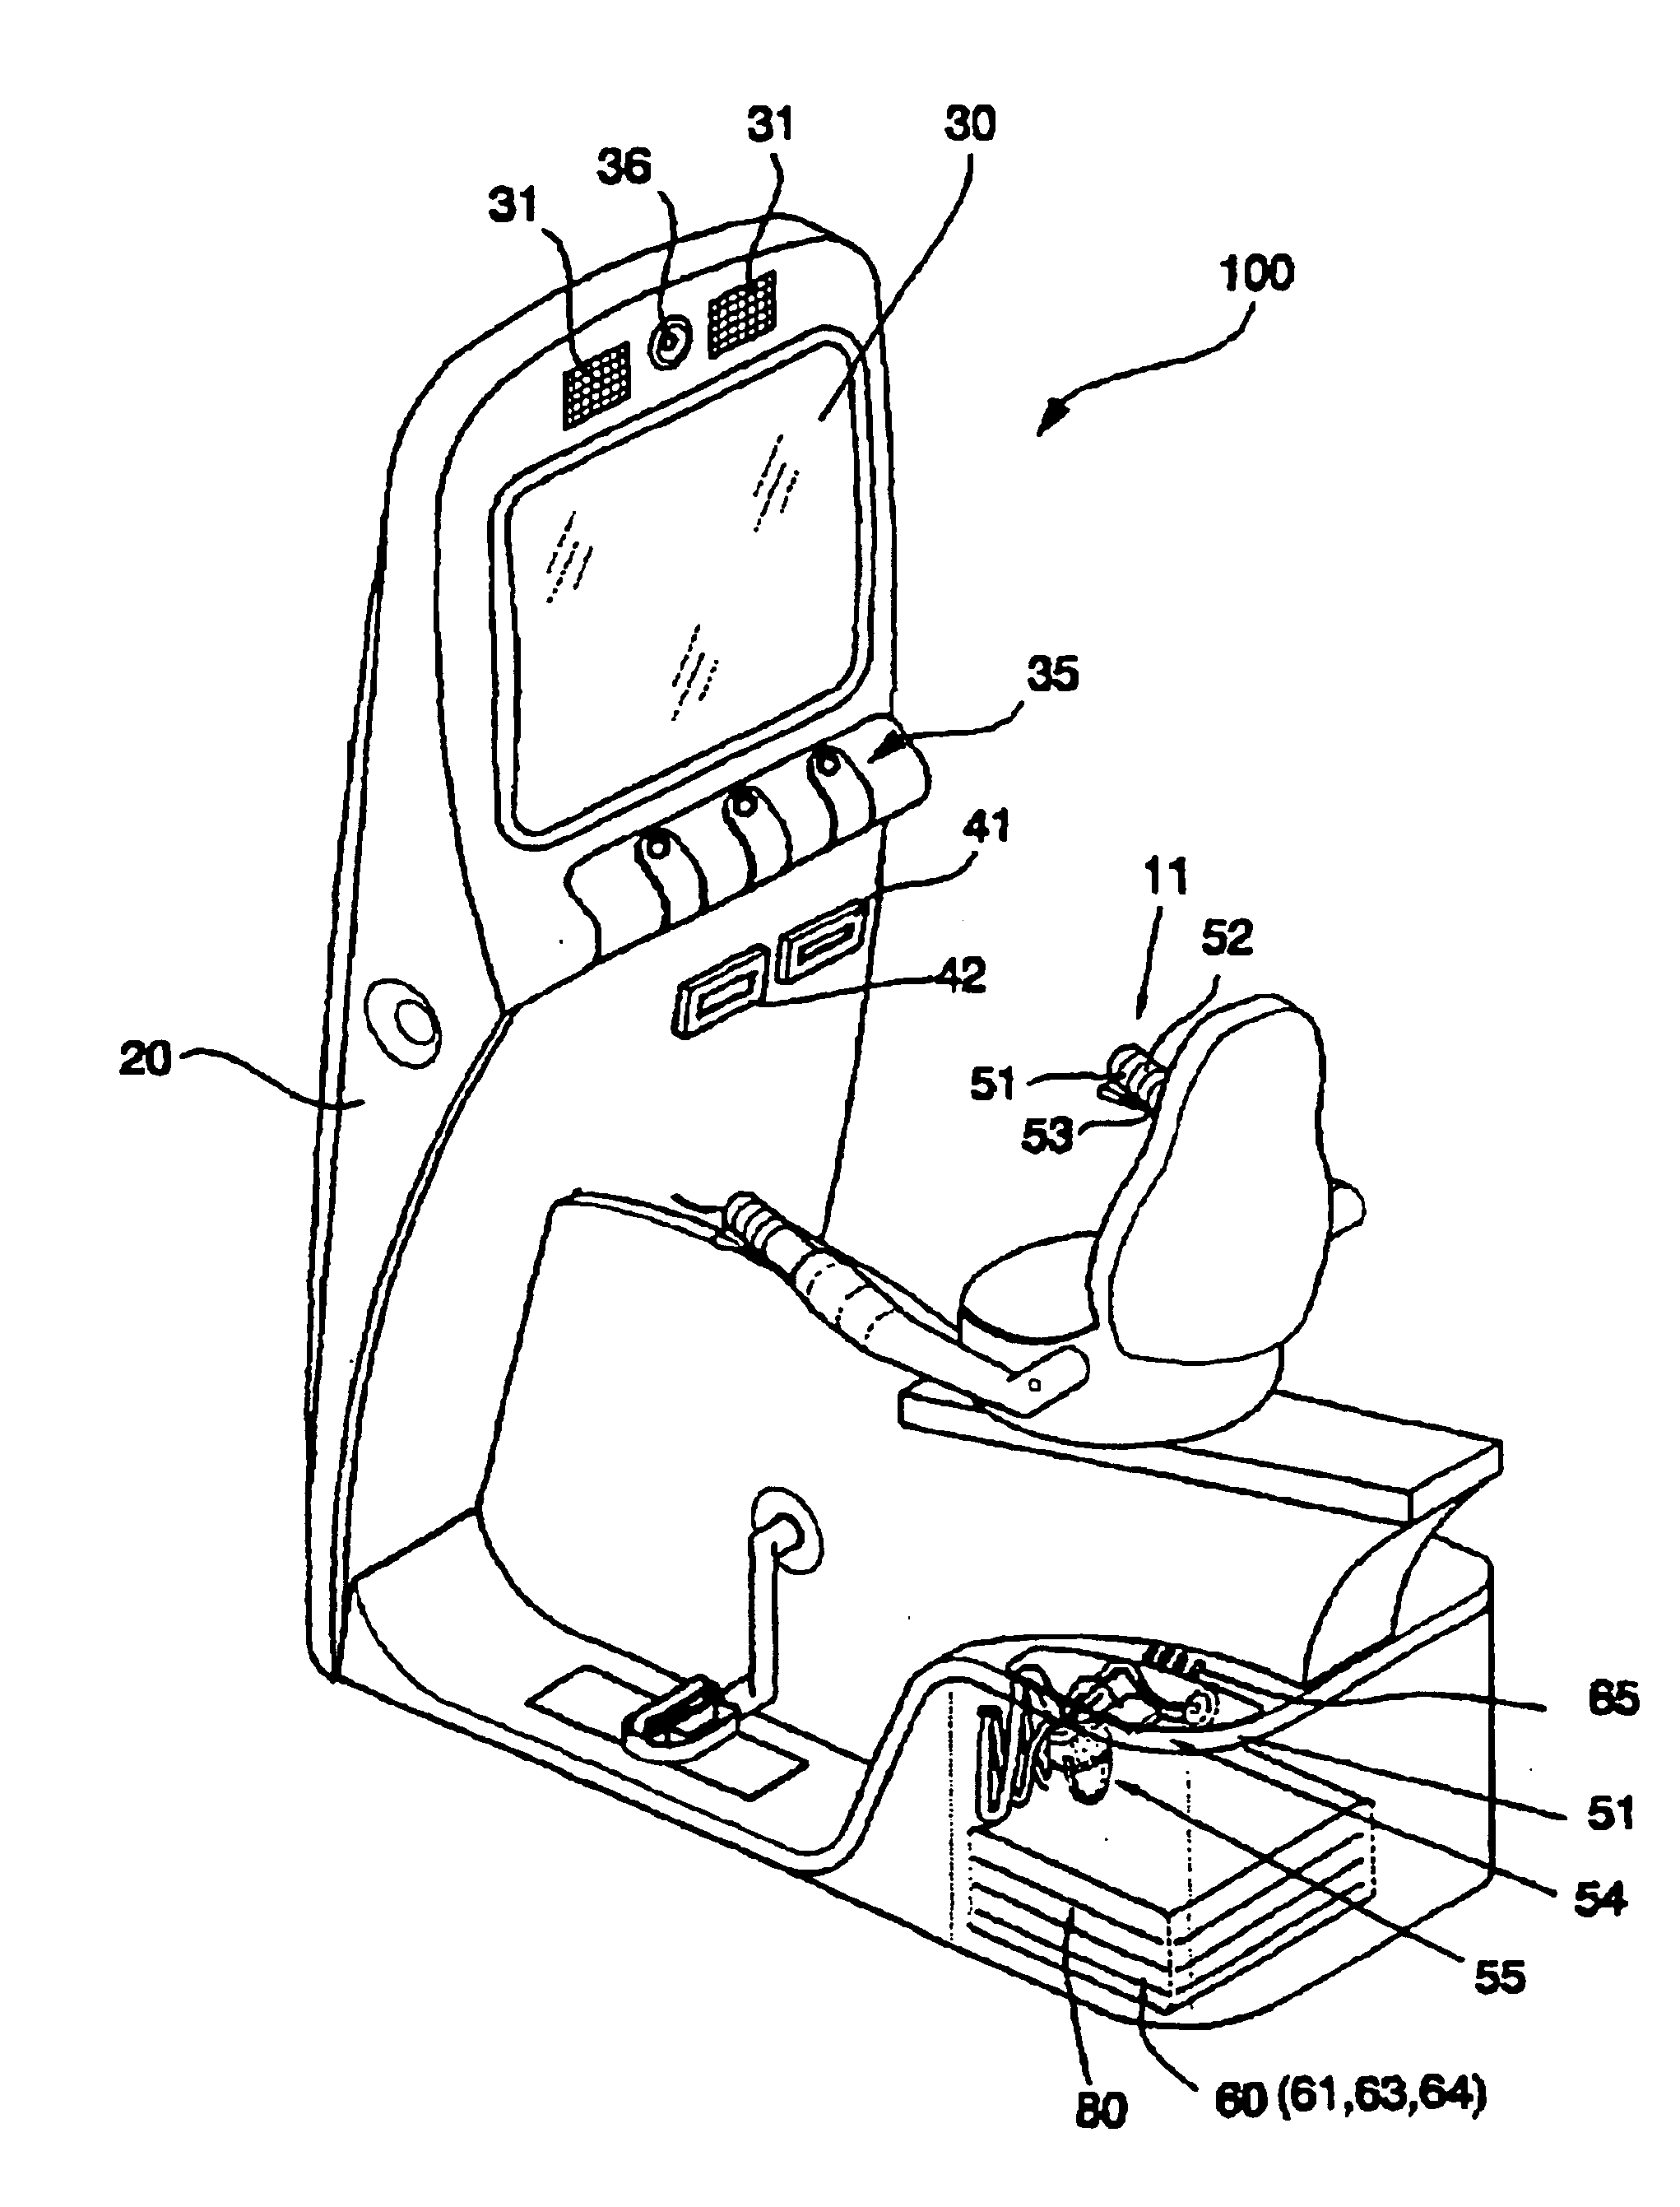 Method and system for automatically evaluating physical health state using a game